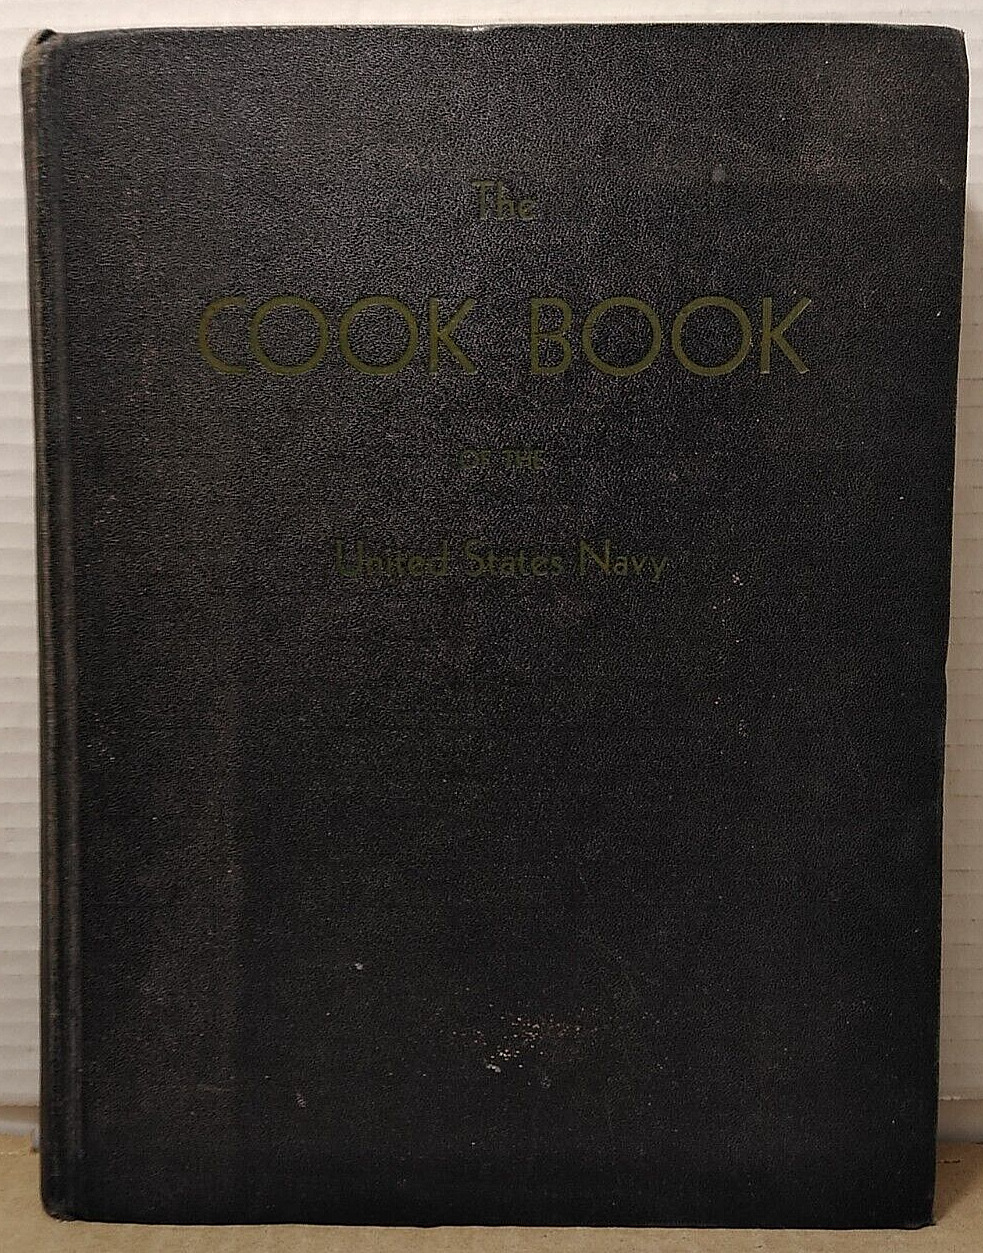 Cook Book of the United States Navy - 1944 - Antique World War II Hardcover WWII